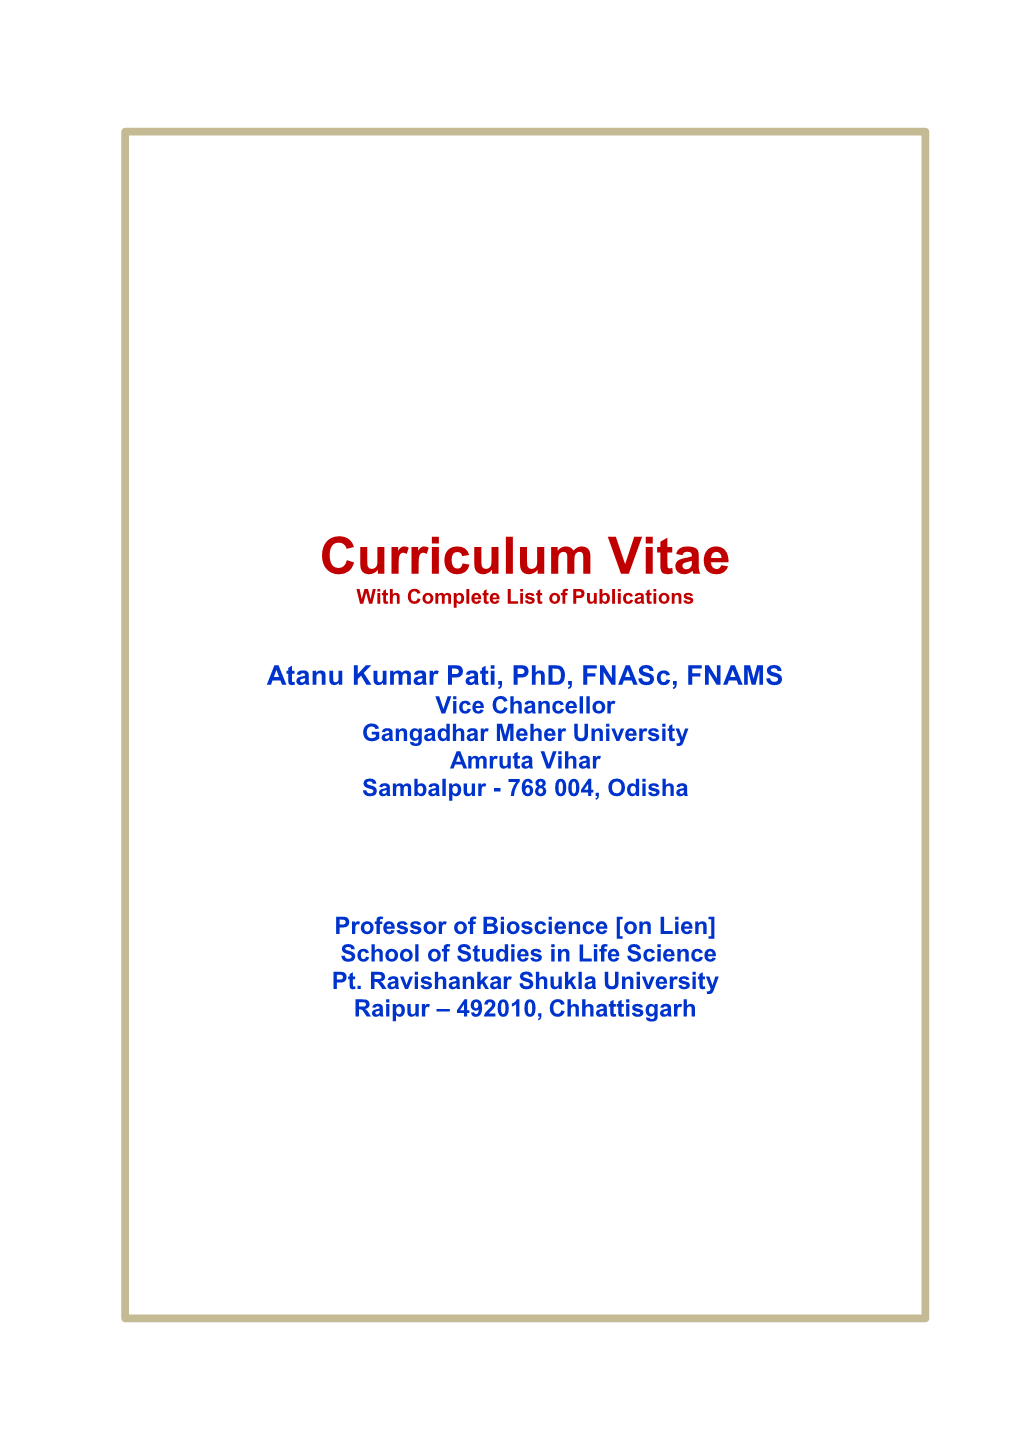 Curriculum Vitae with Complete List of Publications